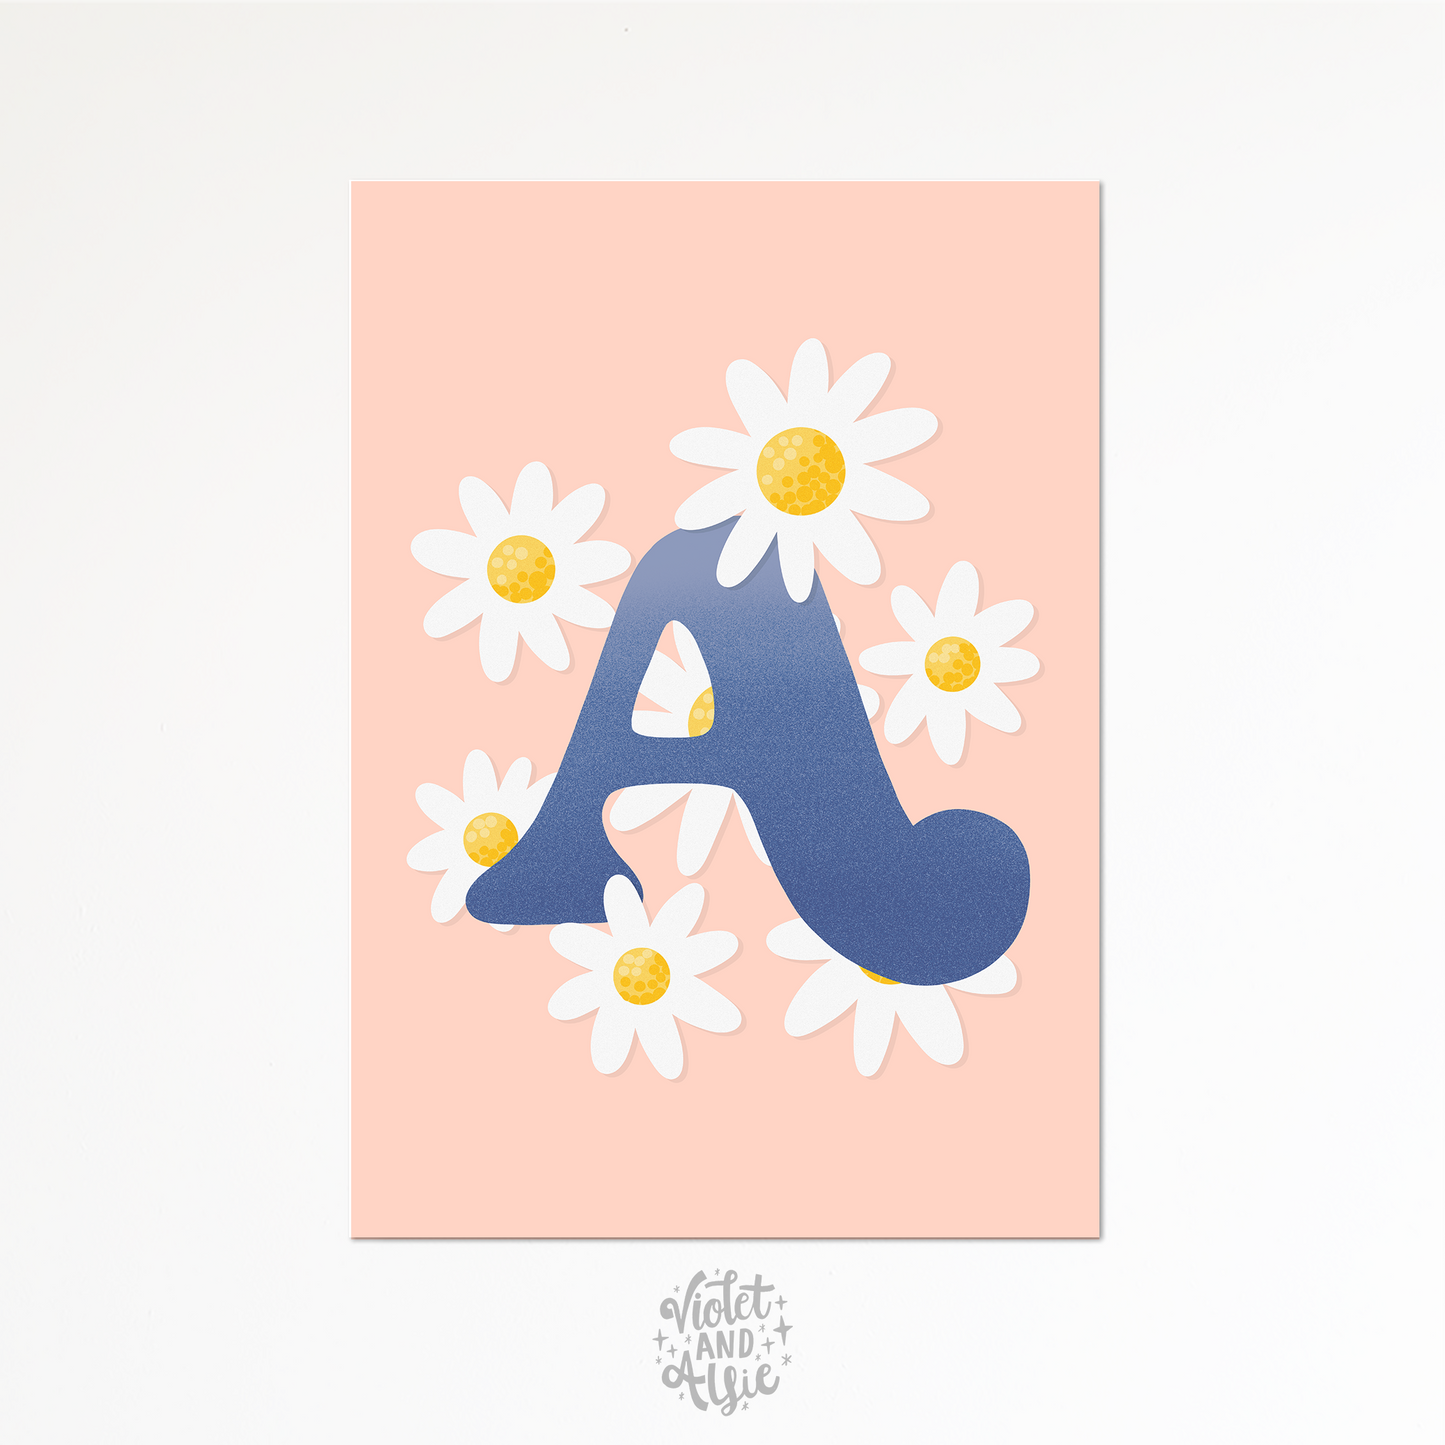 Floral Typographic Letter Print